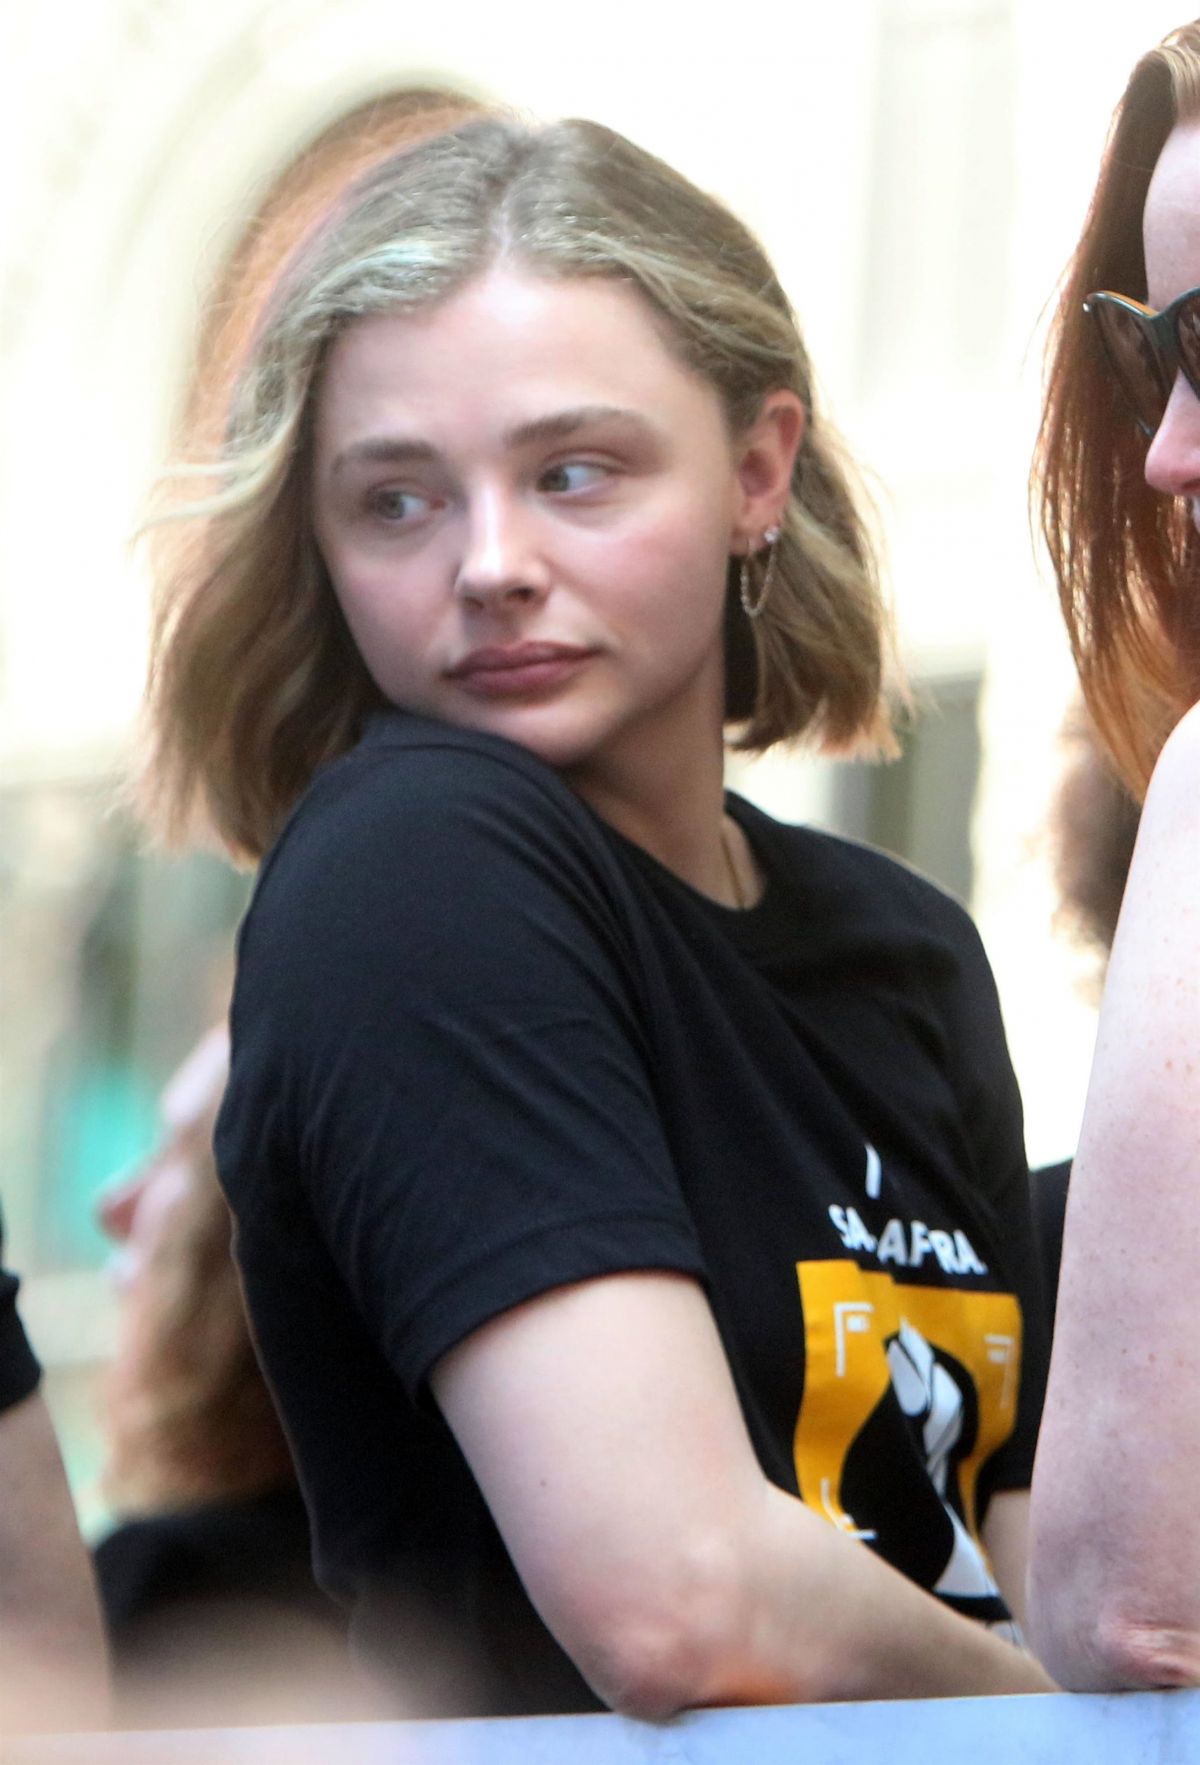 July 24, 2023, New York City, New York, USA: Actor CHLOE GRACE MORETZ seen  at SAG-AFTRA's ˜Rock the City for a Fair Contract' Rally held in Times  Square (Credit Image: © Nancy